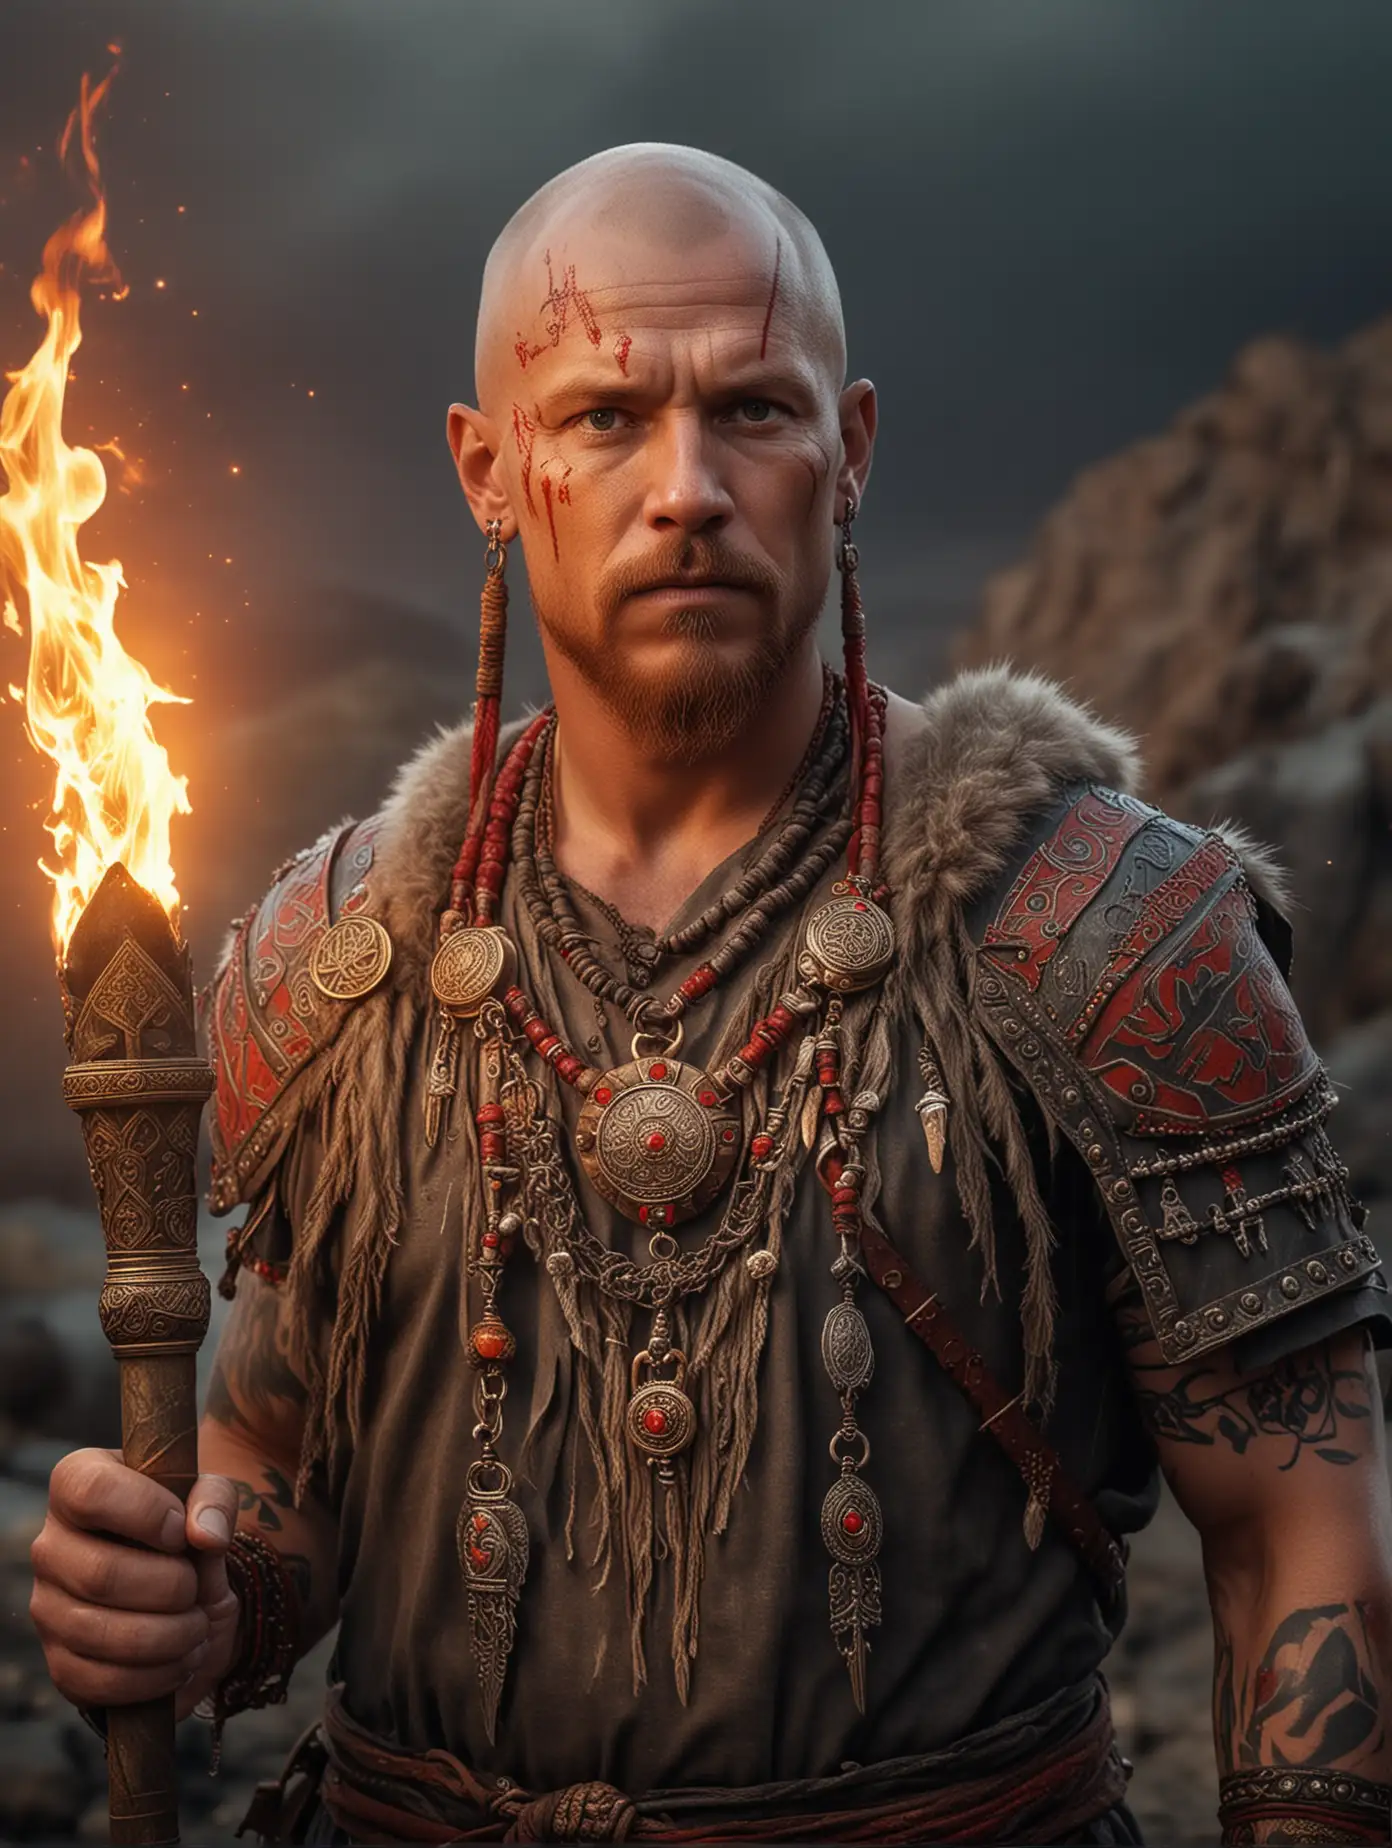 A portrait of an eerie tough viking bald male shaman holding a torch, with red tattoos, wearing a bronze, gray and red tunic, adorned with red and orange gems, many golden mystical signs : 1. | necklace of chili peppers : 1. | Smith workshop in the back : 1. | Very detailed, sunset, nordic atmosphere : 1. | Highly detailed,high precision,focus on textures, hyperrealistic : 1.